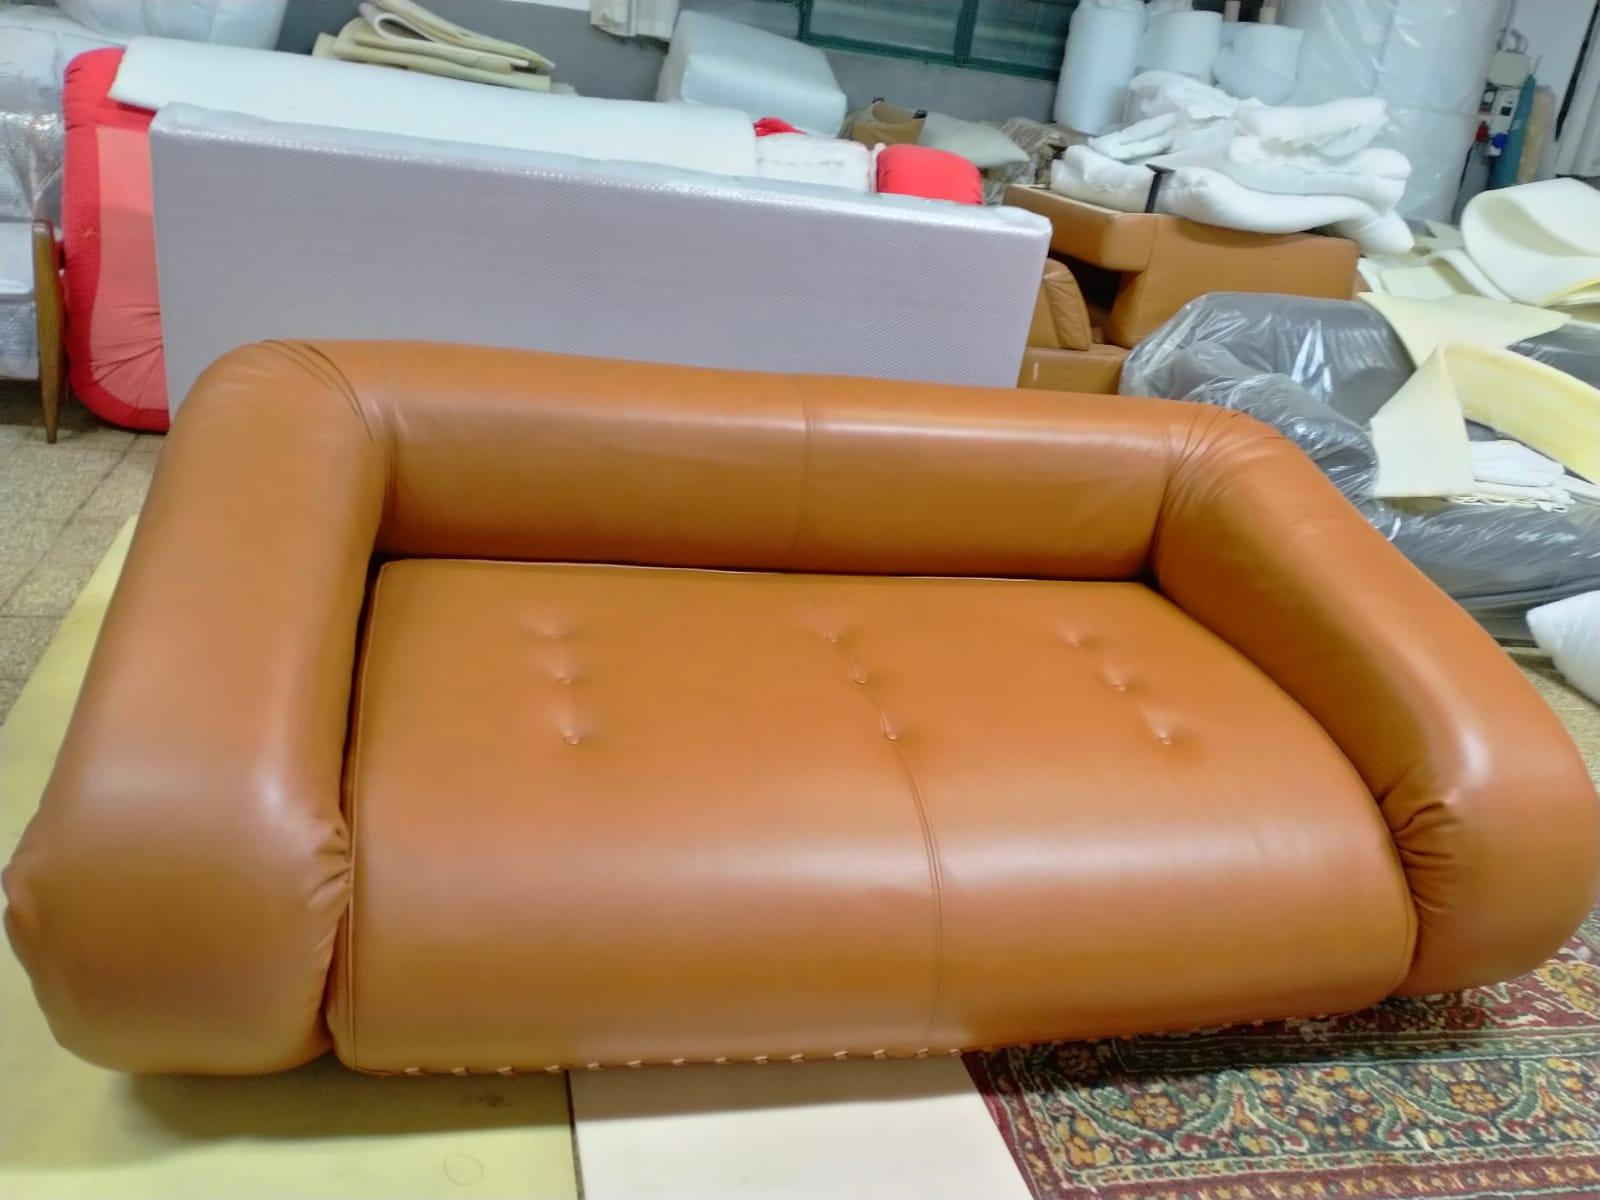 Anfibio Sofa in cognac-colored leather , by Alessandro Becchi produzione Giovannetti , this sofa was and is incredibly successful, it is one of the most iconic sofas designed in the 1970s . Its feature is that it can be opened and becomes a very